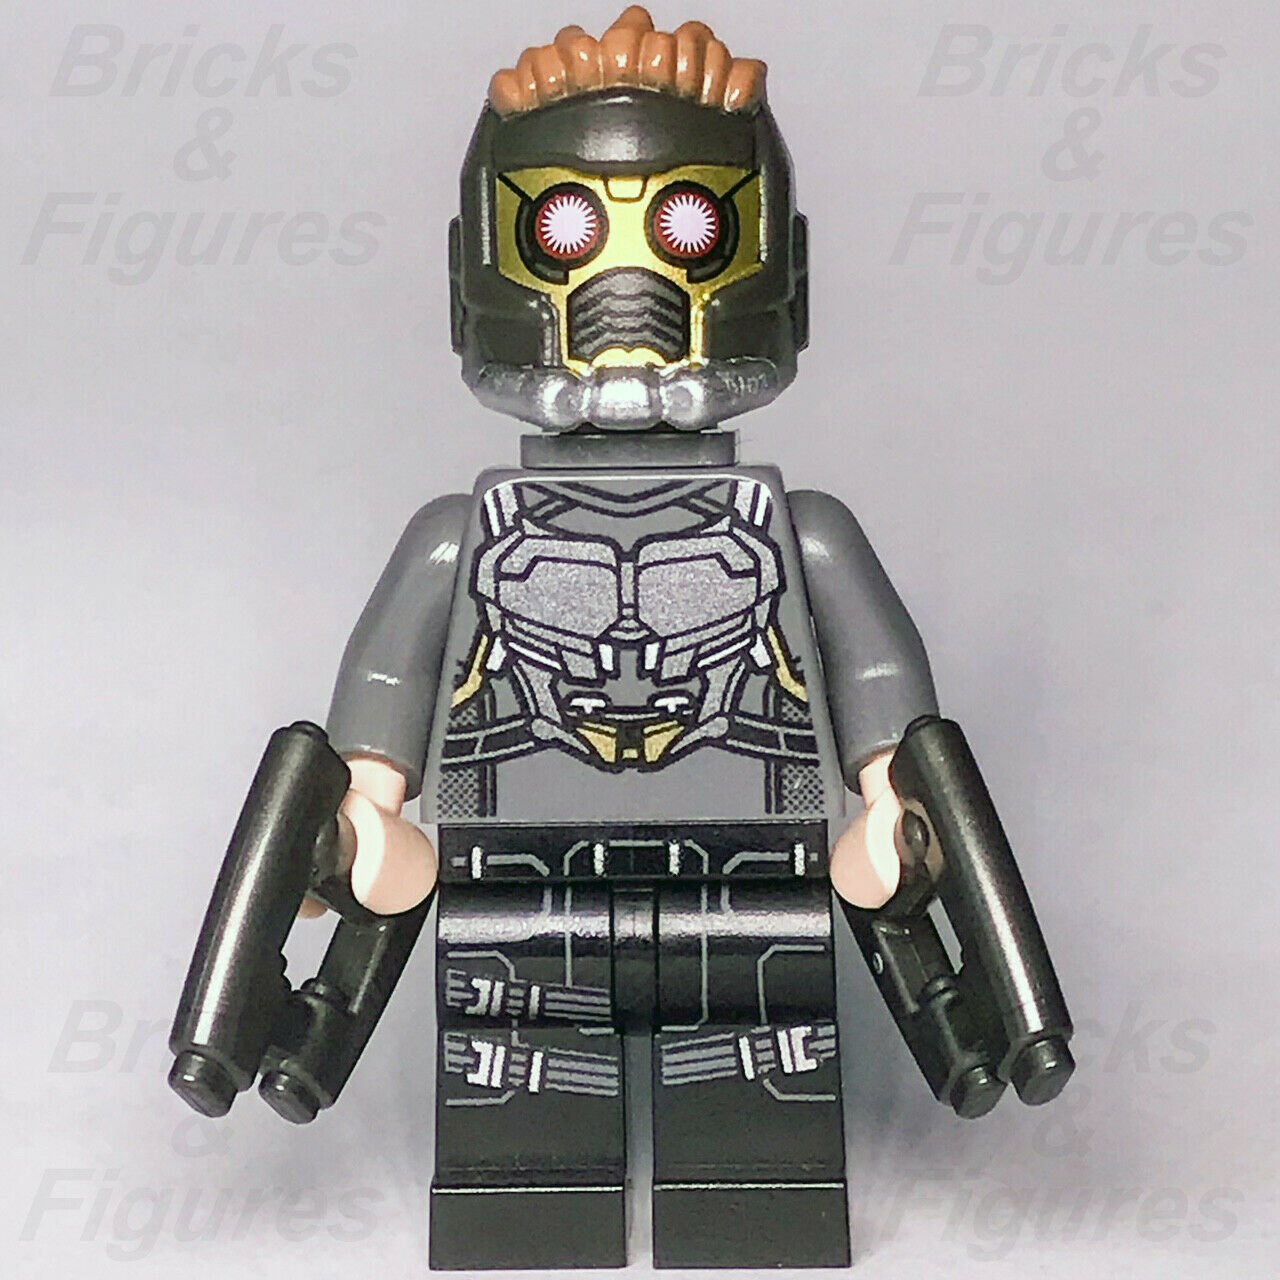 Marvel Super Heroes LEGO Star-Lord Guardians of the Galaxy Minifigure 76081 - Bricks & Figures